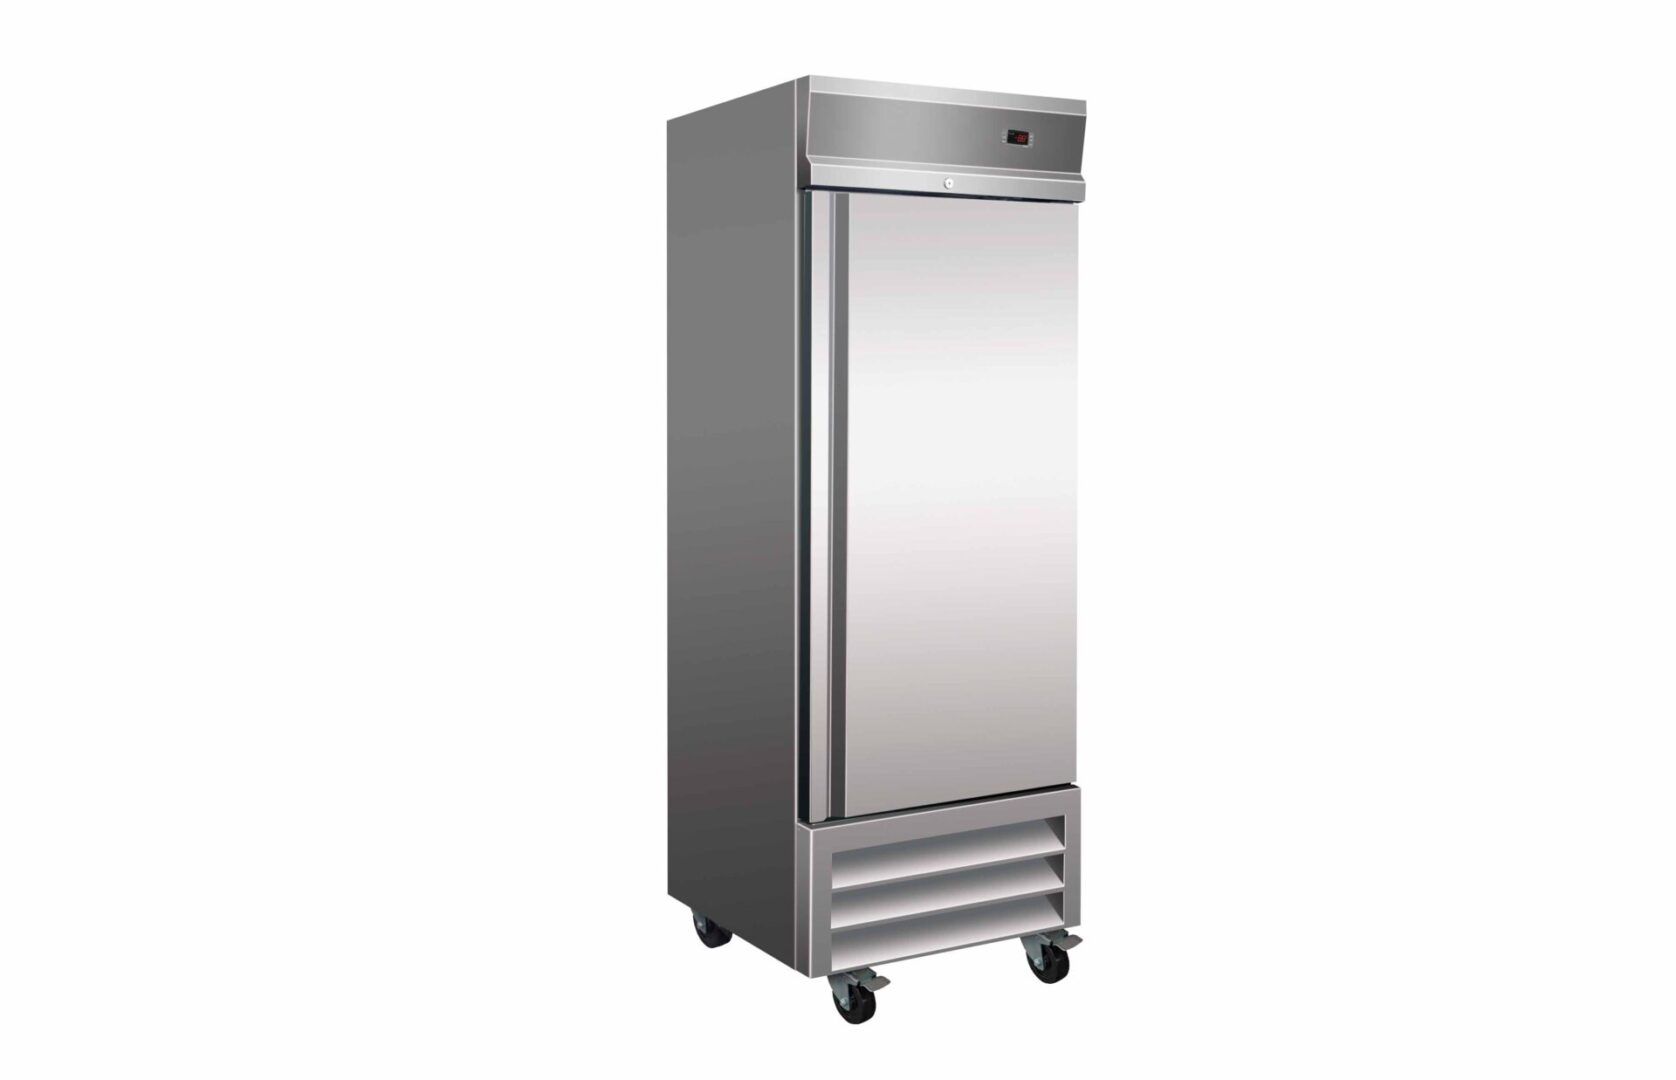 A stainless steel refrigerator with wheels and handles.